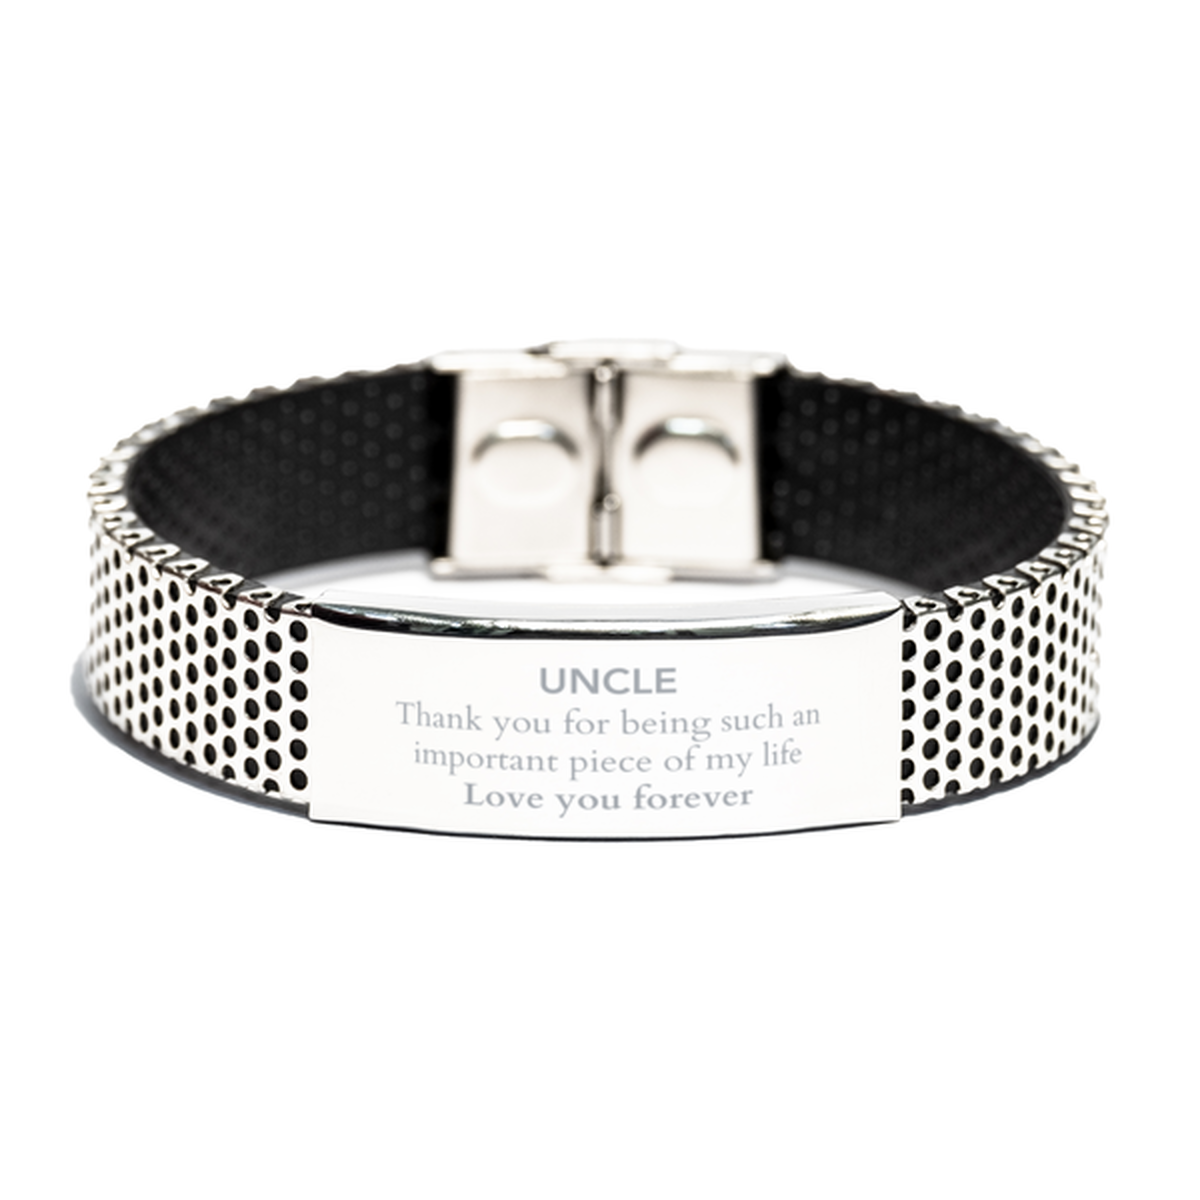 Appropriate Uncle Stainless Steel Bracelet Epic Birthday Gifts for Uncle Thank you for being such an important piece of my life Uncle Christmas Mothers Fathers Day